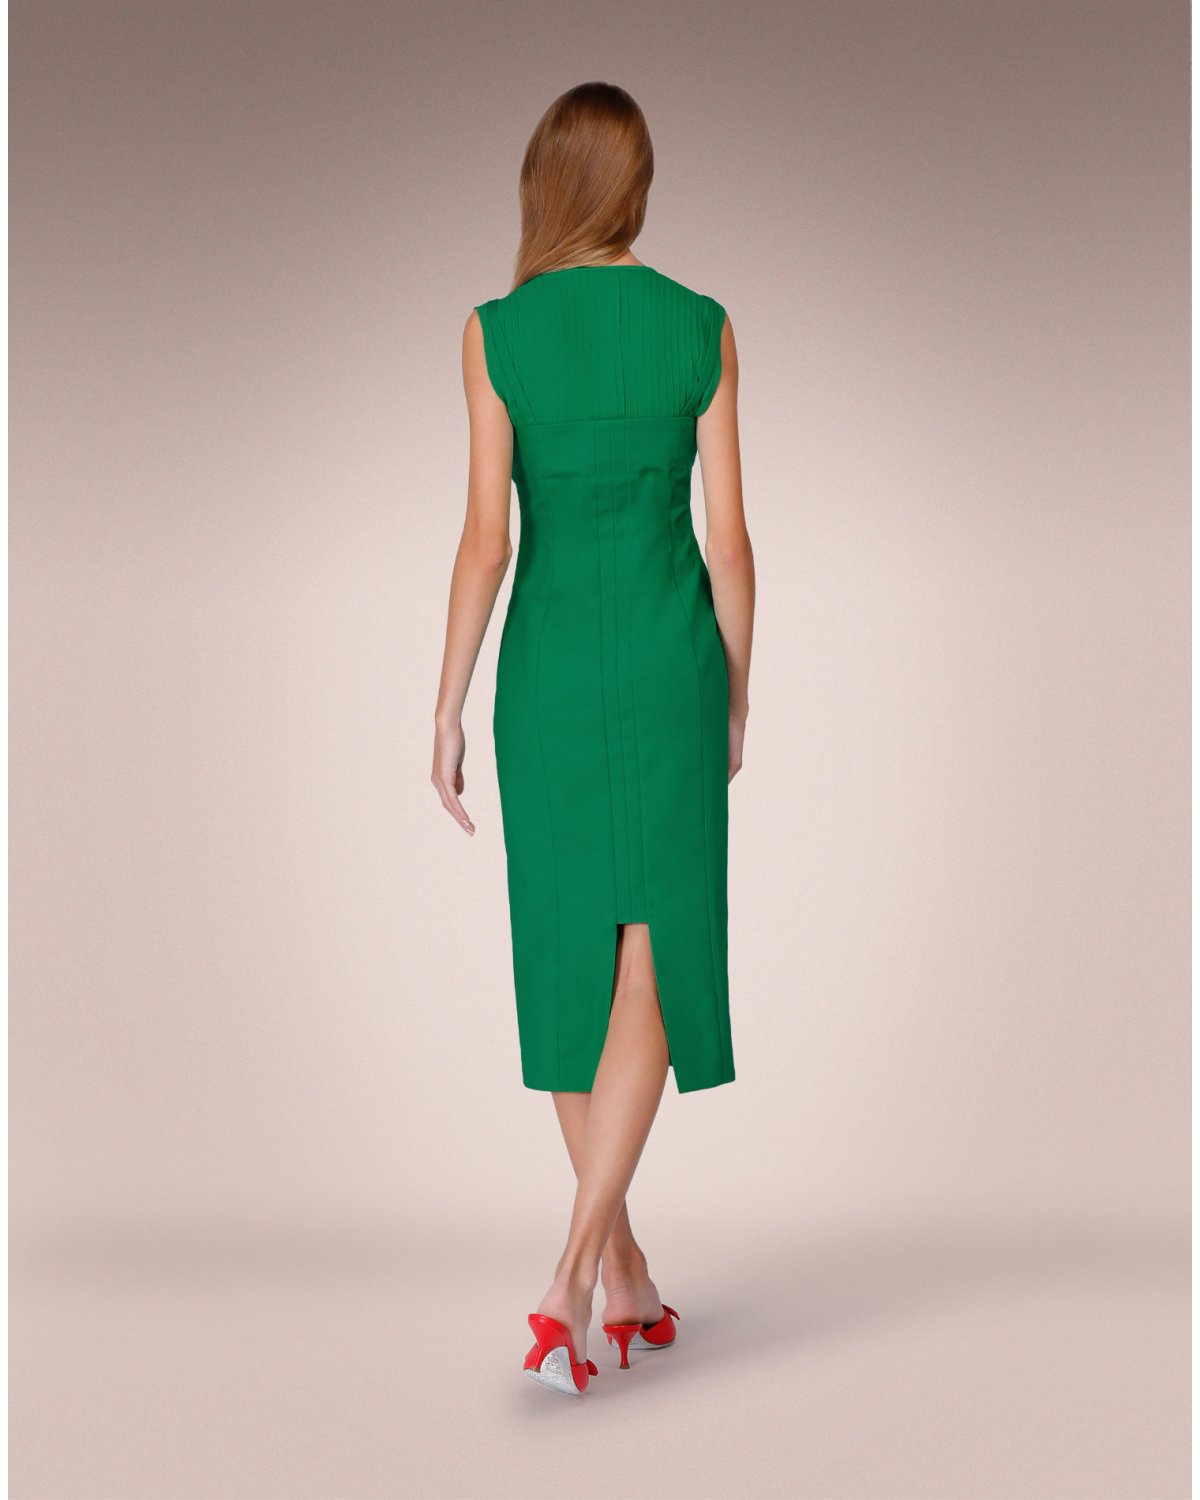 Green cocktail dress | Temporary Flash Sale | Genny